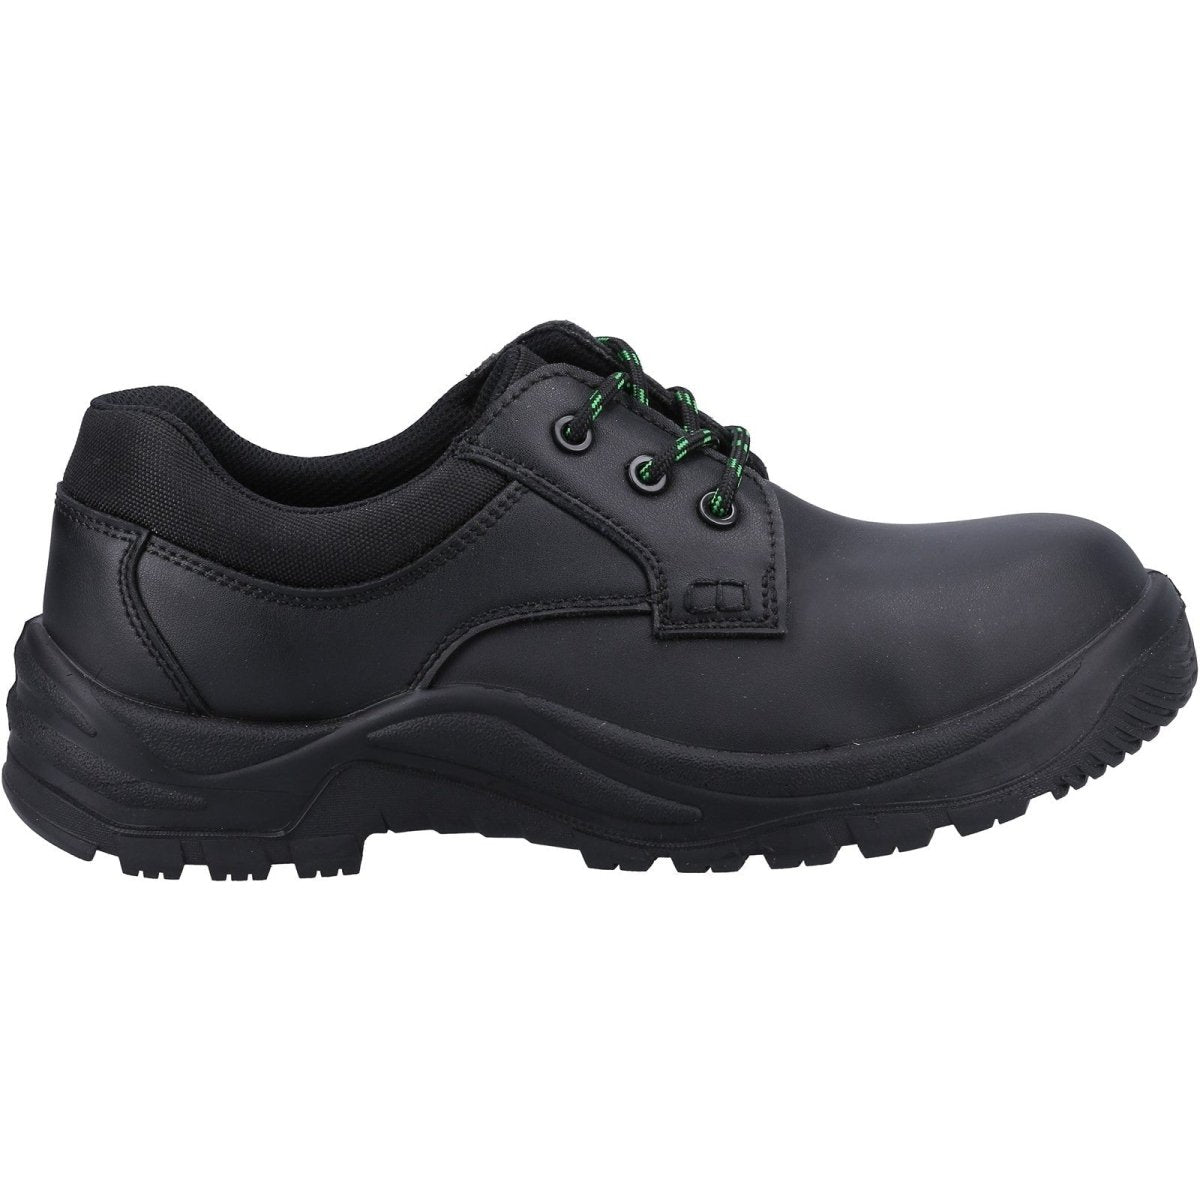 Amblers Safety 504 Shoes - Shoe Store Direct